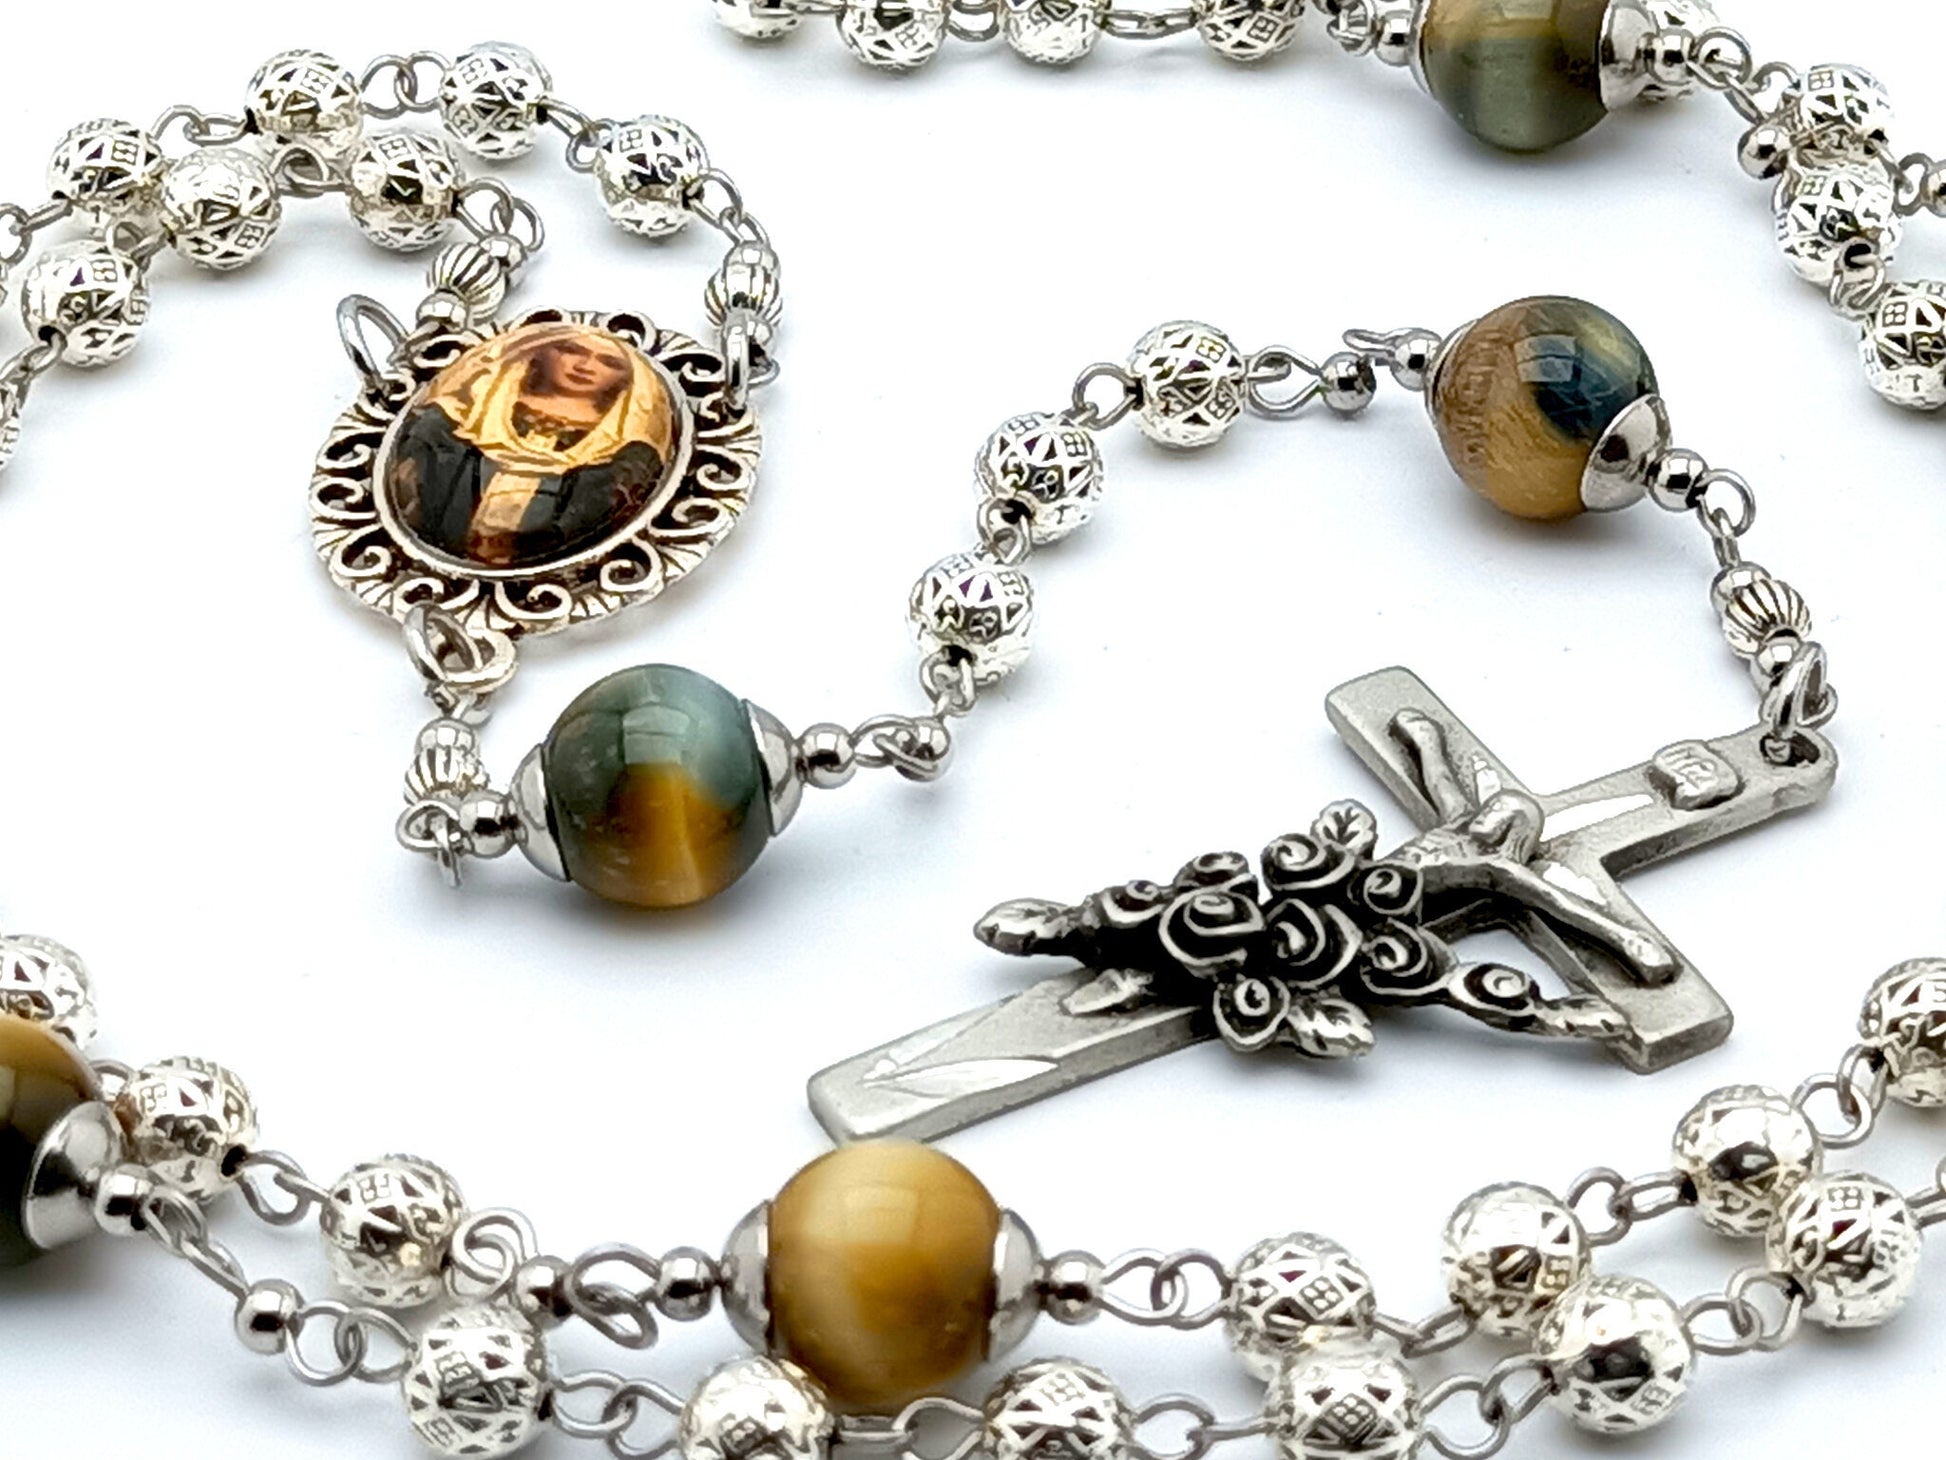 Our Lady of the Rosary unique rosary beads with stainless steel and silver beads, floral etched crucifix and picture centre medal.